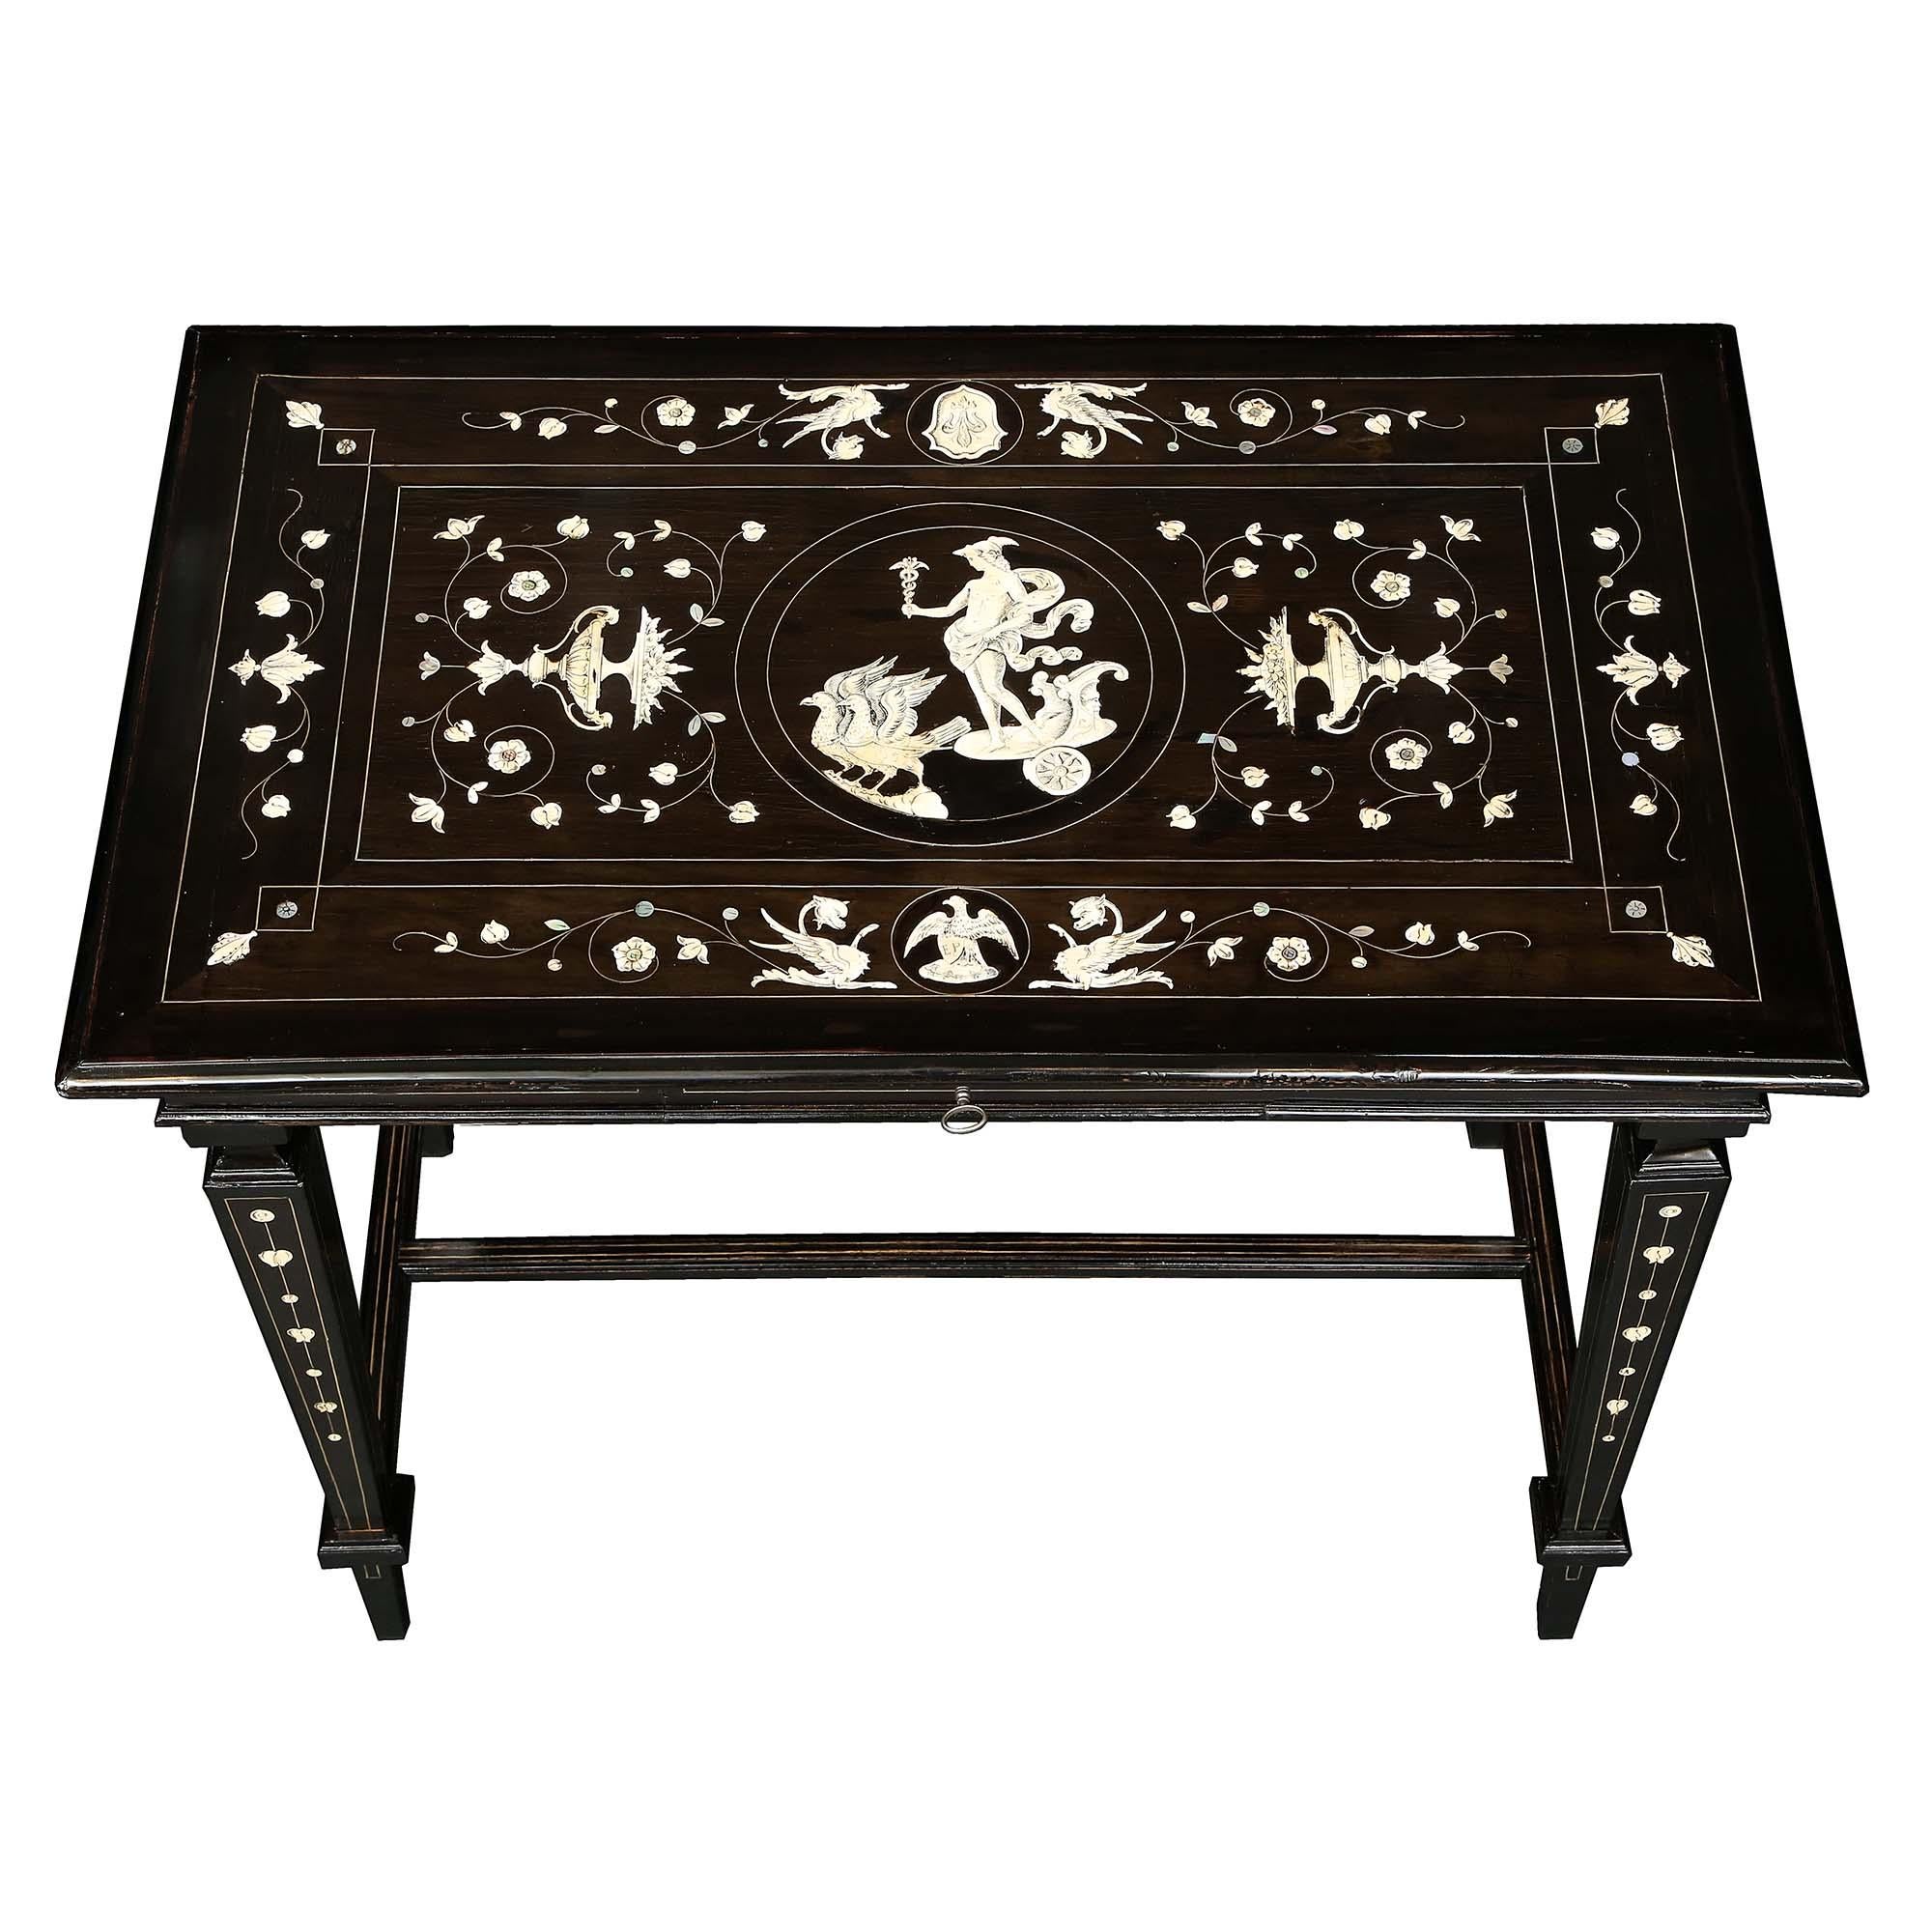 A striking Italian early 19th century Louis XIV style ebony table. The table is raised by tapered legs joined by an H stretcher. The glorious table top is inlayed with bone and mother of pearl bringing together the remarkable, yet restrained, flower